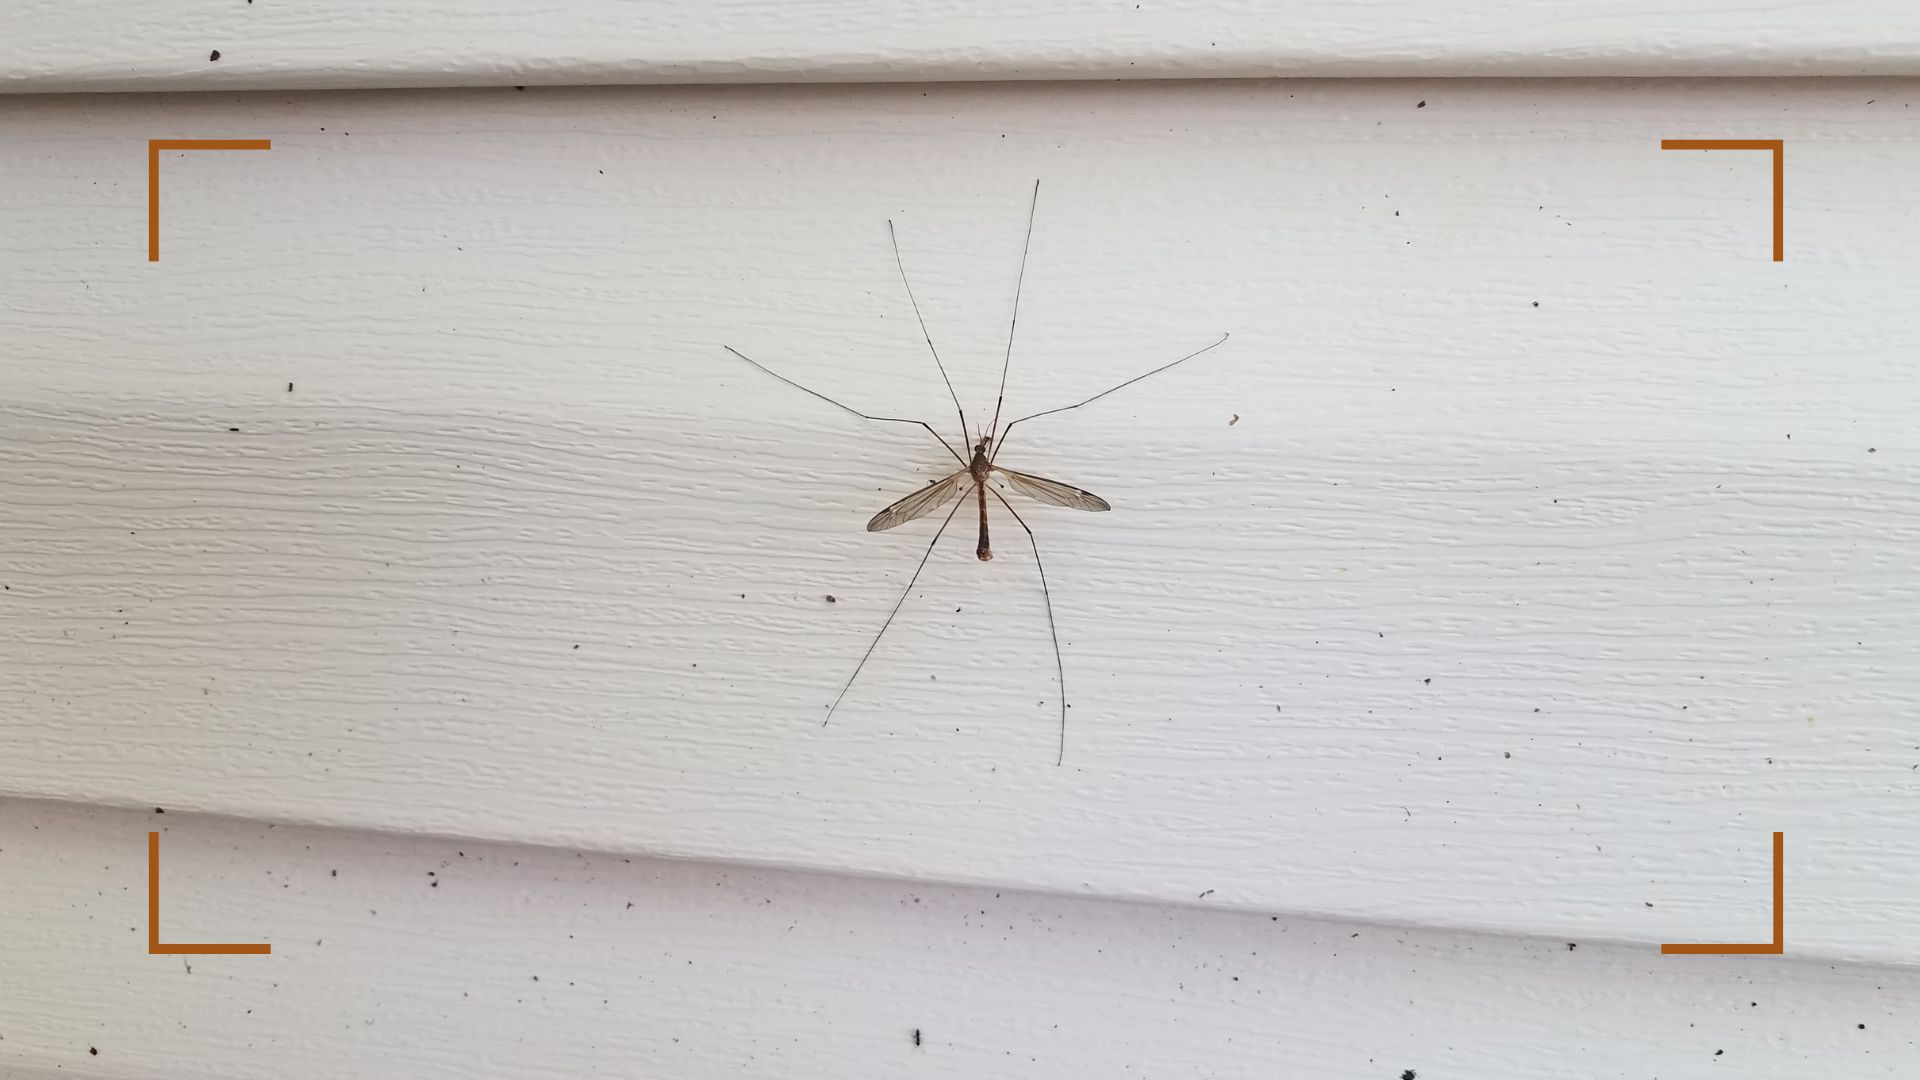 Not all Daddy-Long-Legs are Spiders! - Good News Pest Solutions